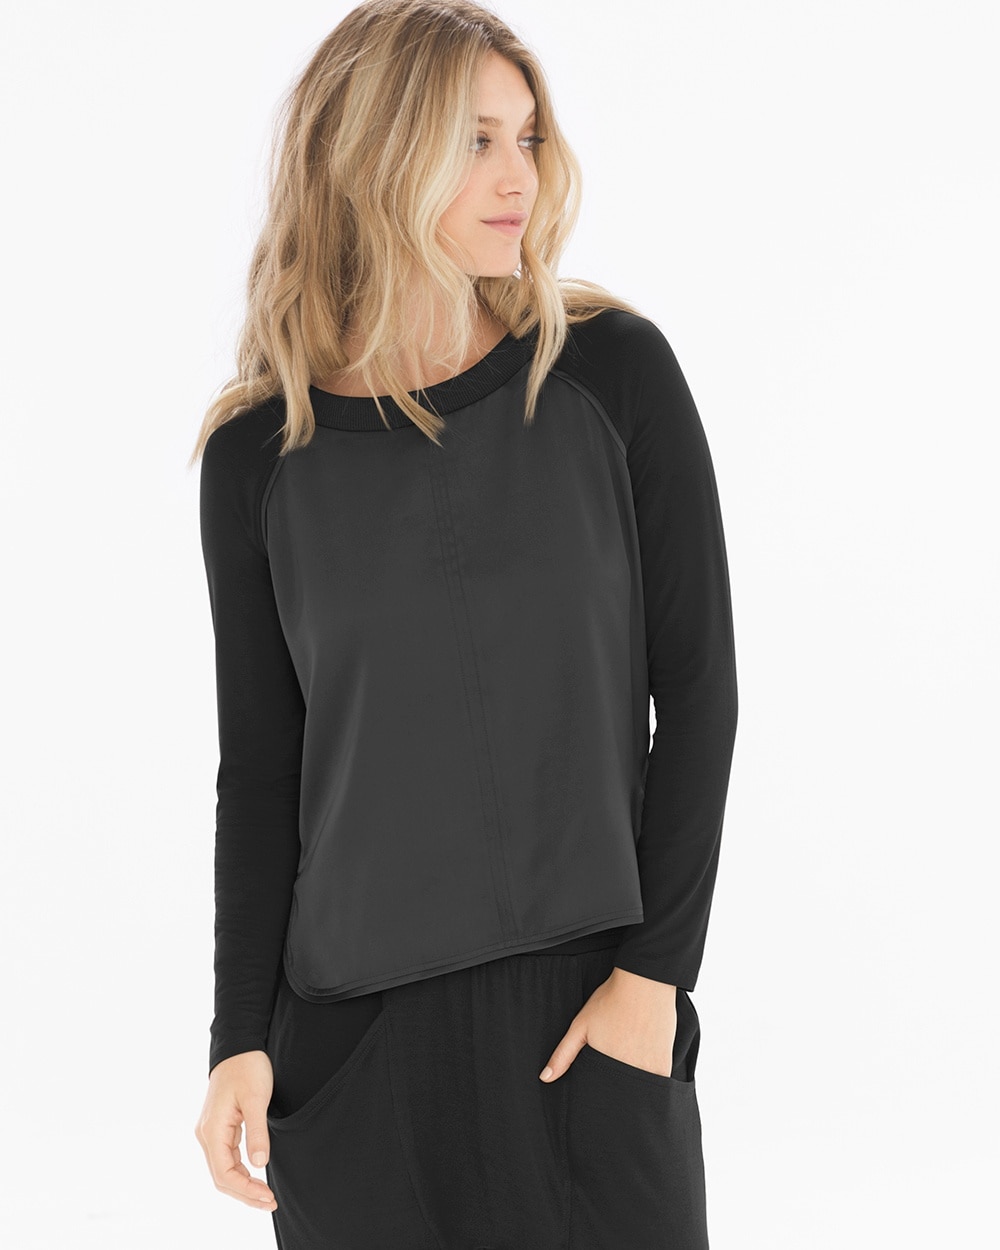 X by Gottex Fabric Mixing Long Sleeve Tee